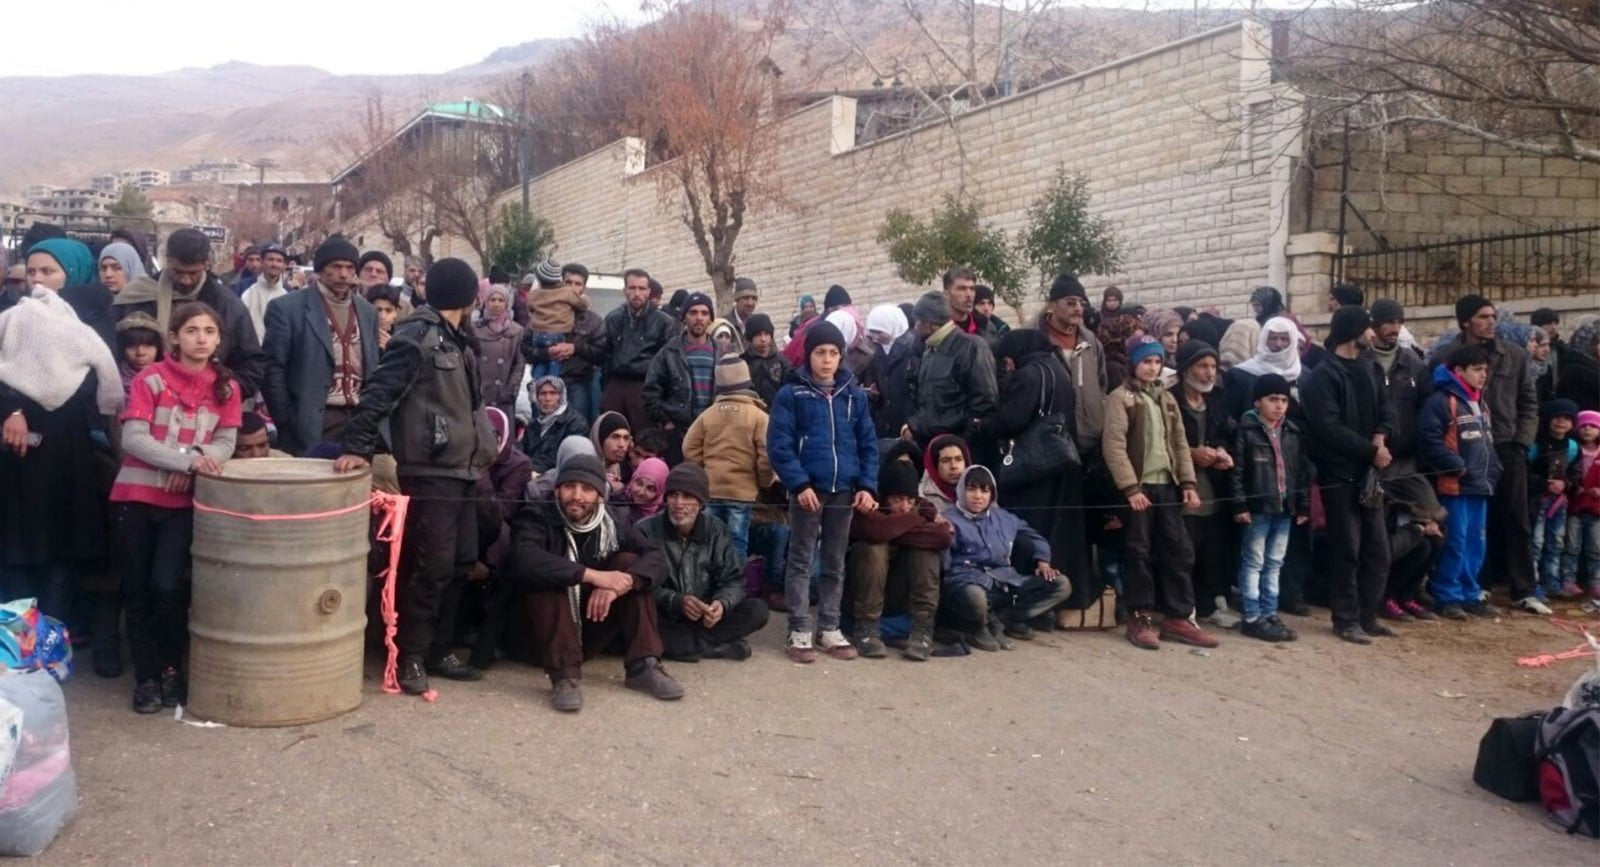 Syrians wait for the arrival of an aid convoy on January 11, 2016 in the besieged town of Madaya.